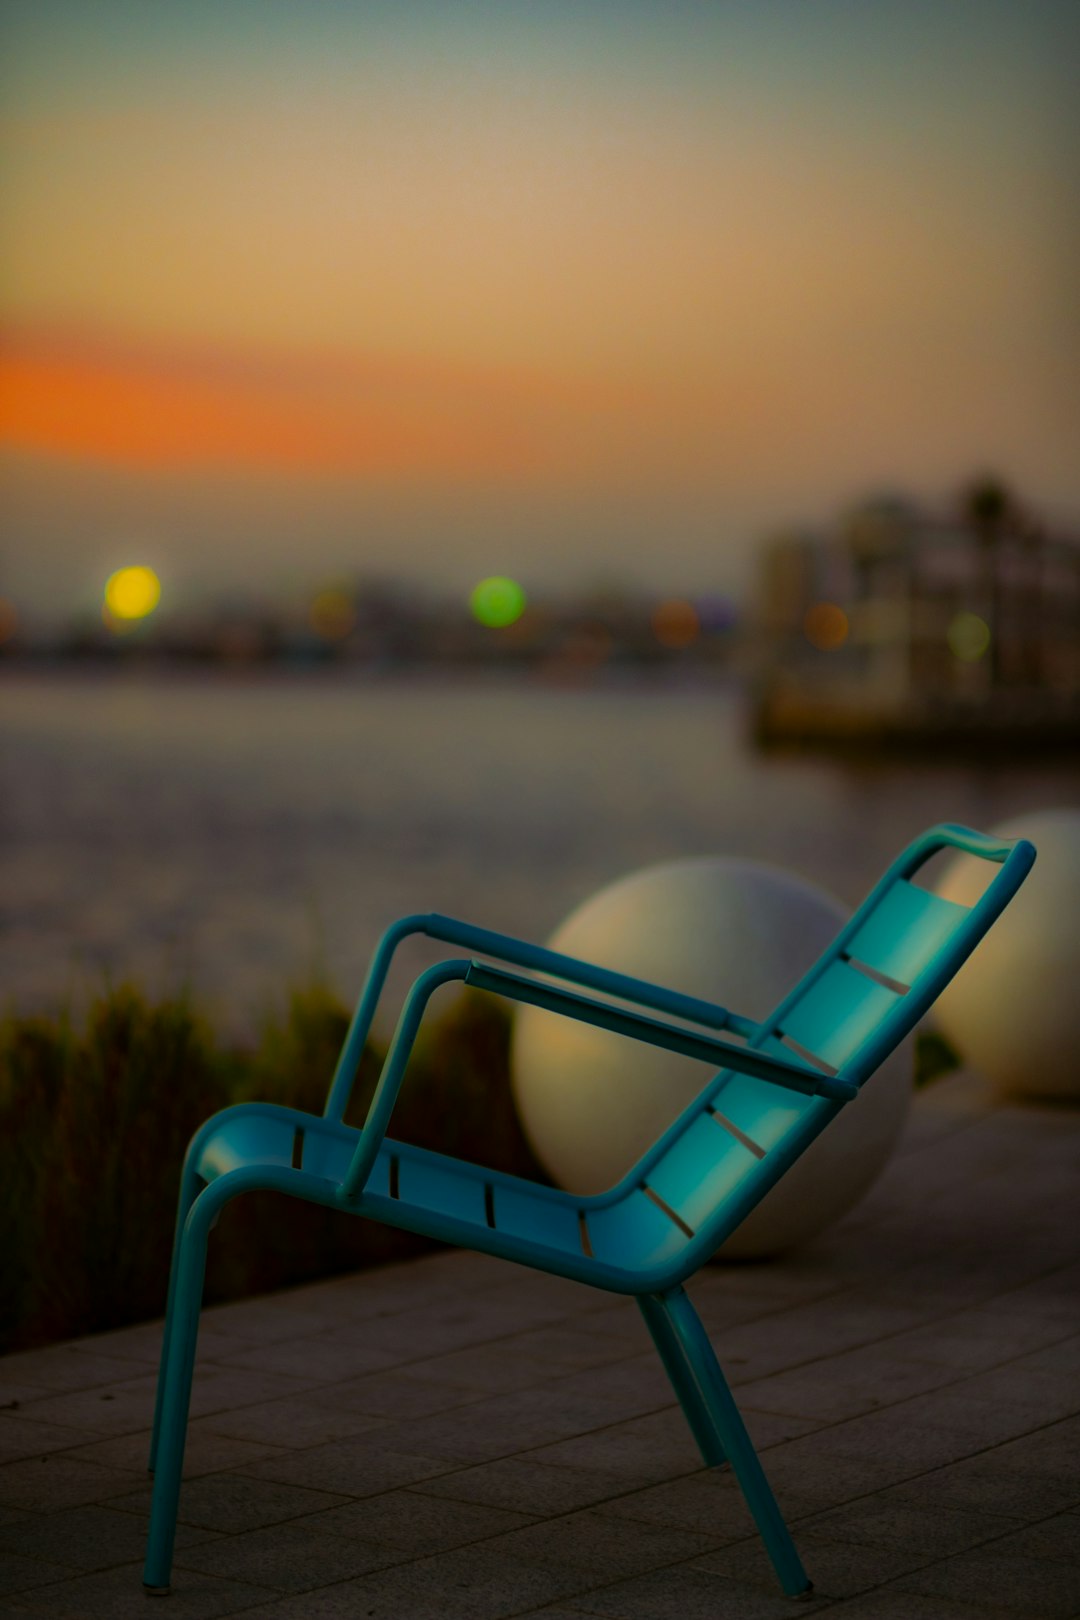 blue and white chair on green grass field during sunset